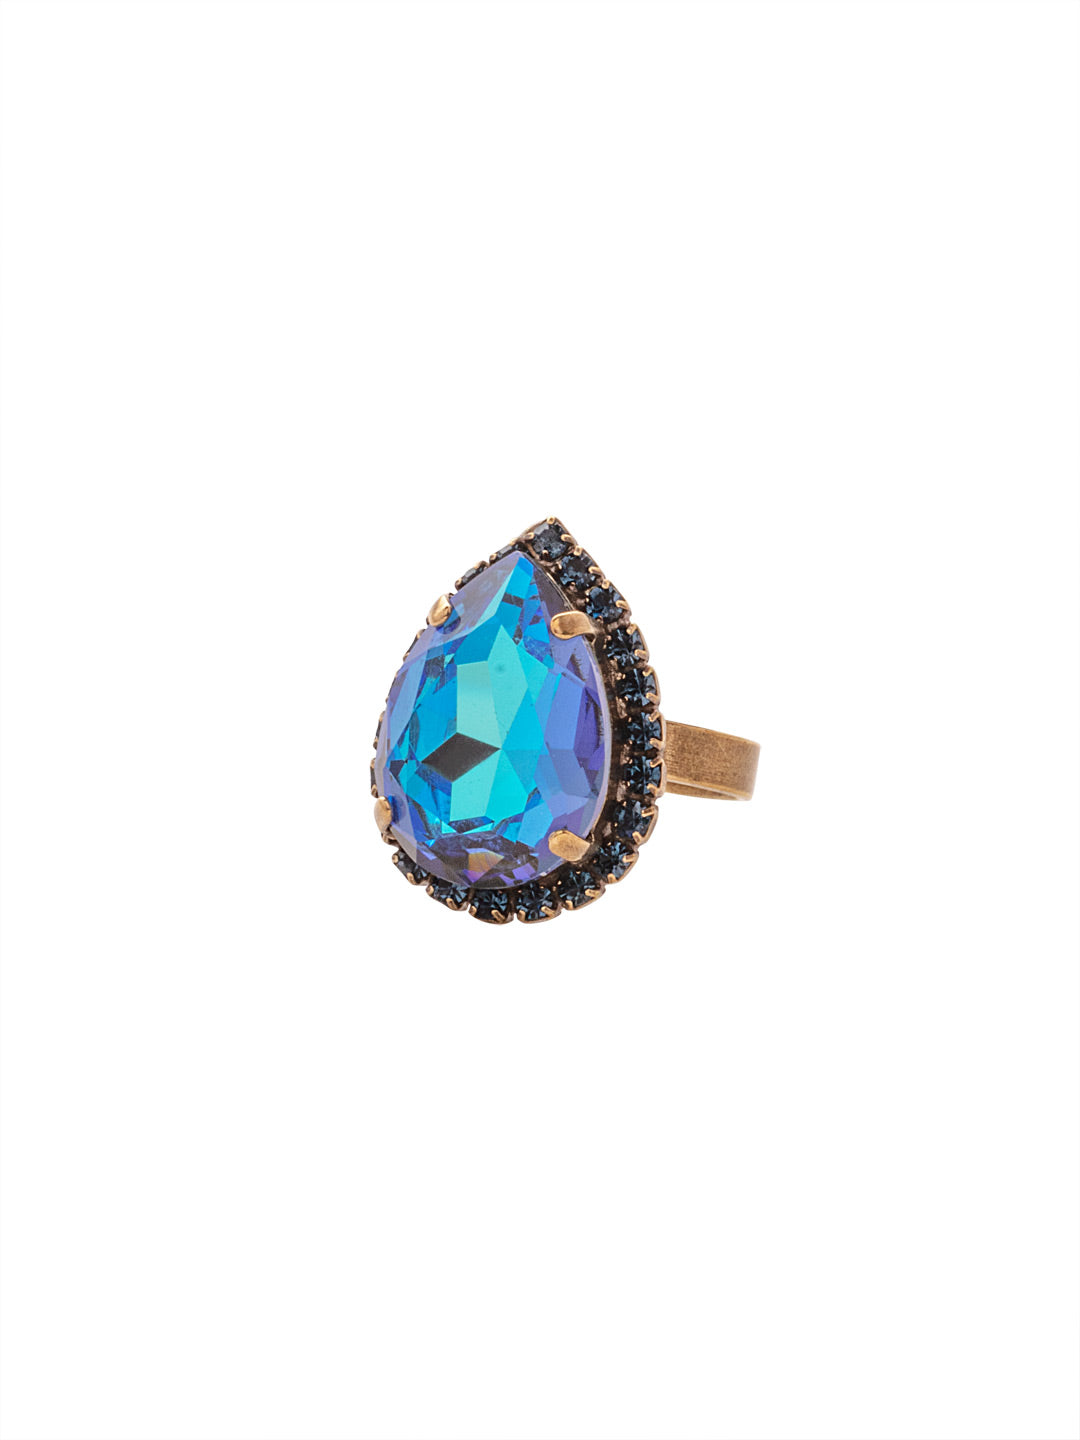 Giselle Pear Cocktail Ring - RFC80AGVBN - <p>The Giselle Pear Cocktail Ring features a halo pear cut crystal on an adjustable band. From Sorrelli's Venice Blue collection in our Antique Gold-tone finish.</p>